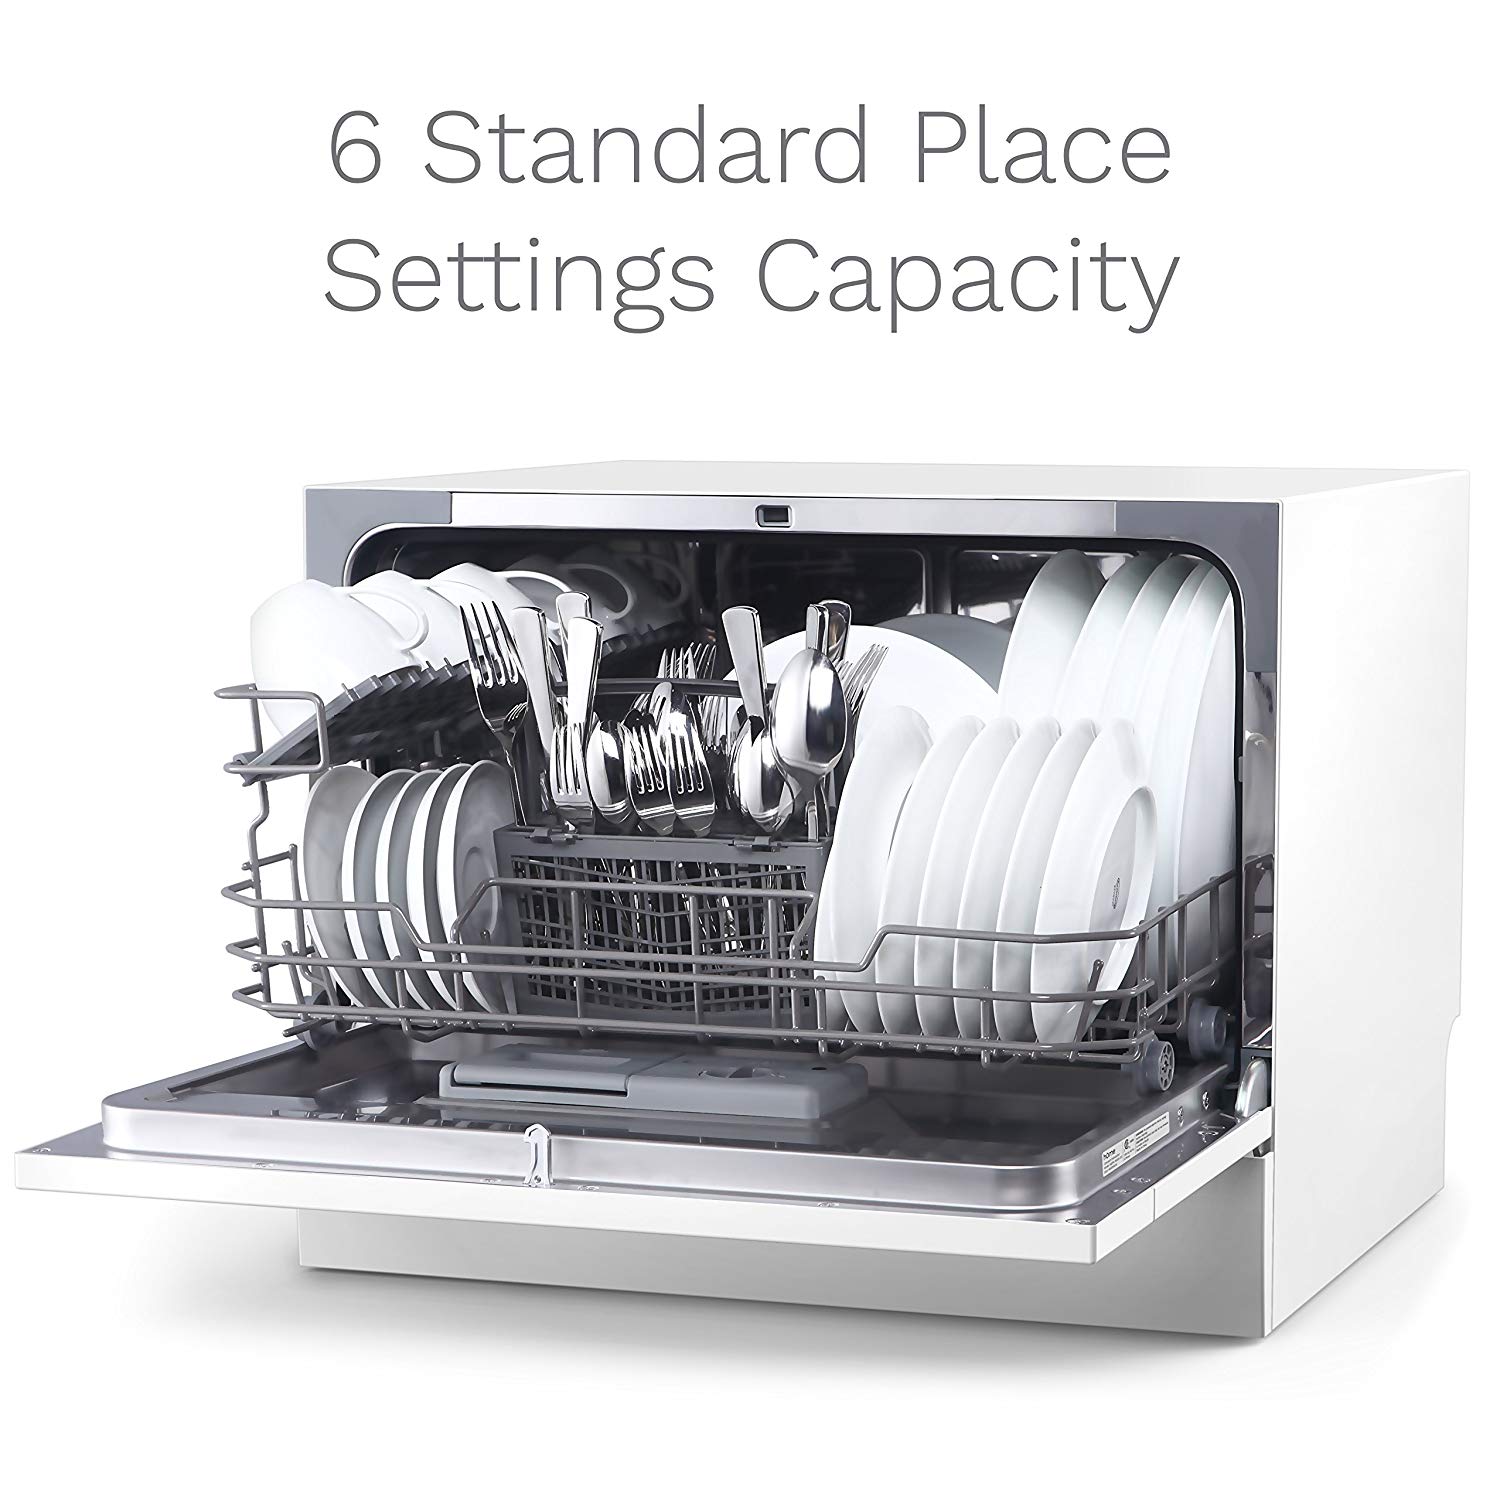 Review of hOmeLabs Compact Countertop Dishwasher - Energy Star Portable Mini Dish Washer